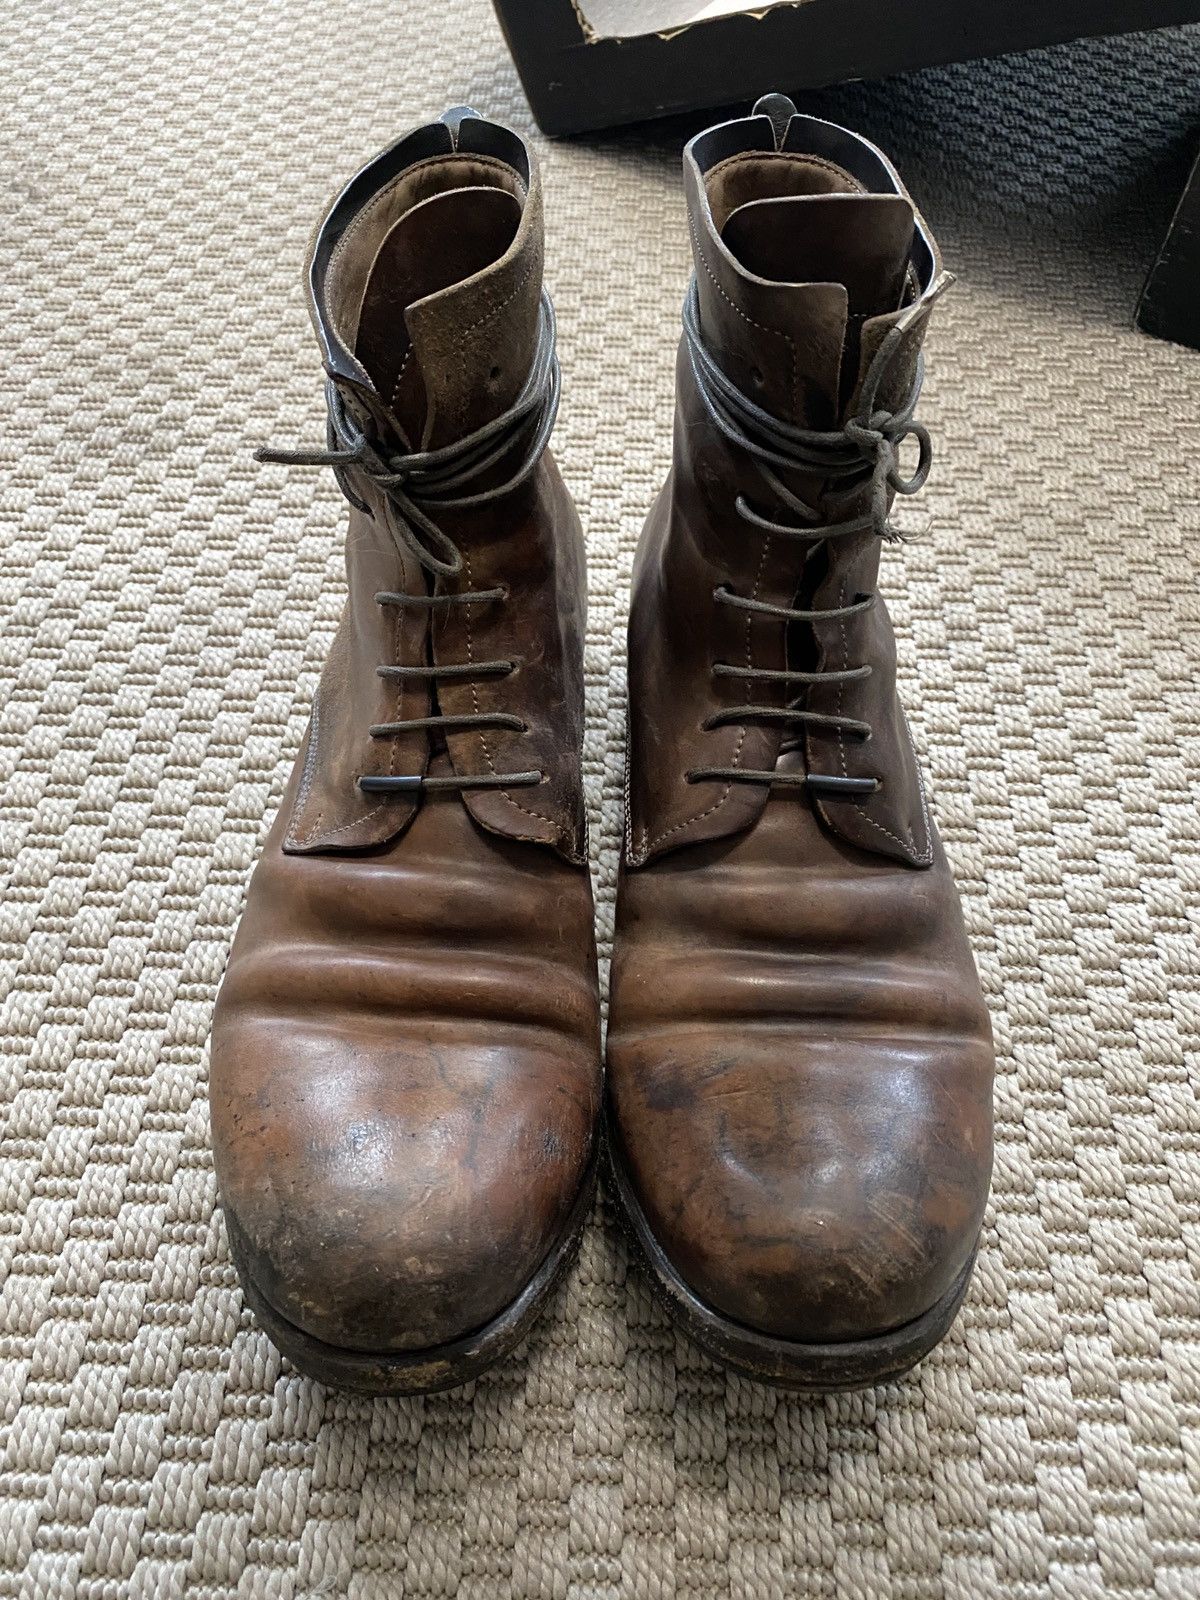 Layer-0 S Cordovan boots | Grailed